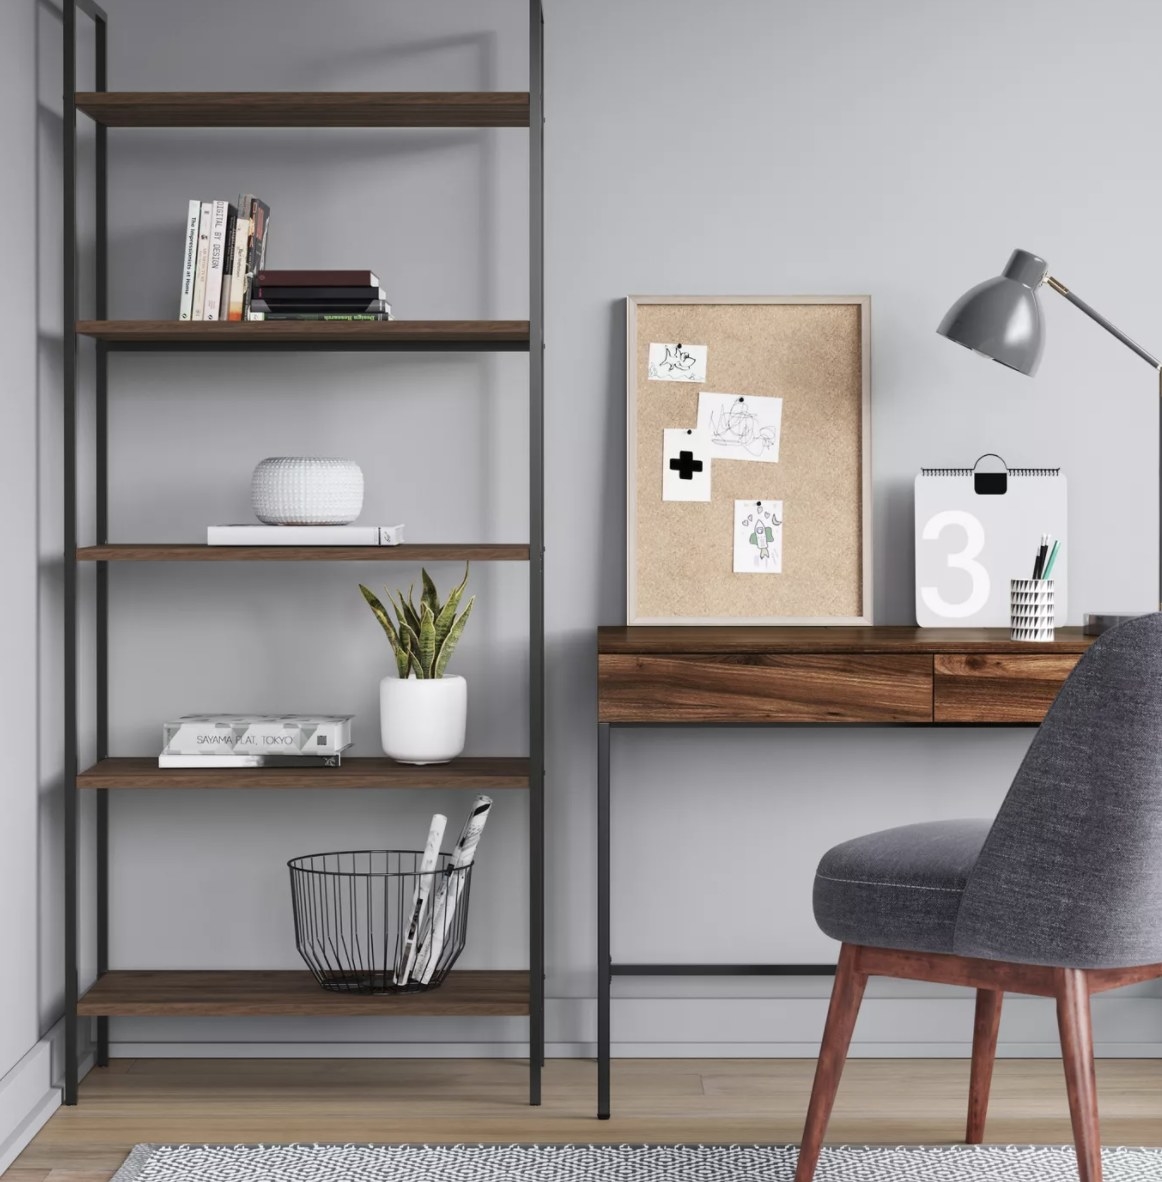 The black metal frame and dark brown shelves are holding books, plants and other decor in a home office